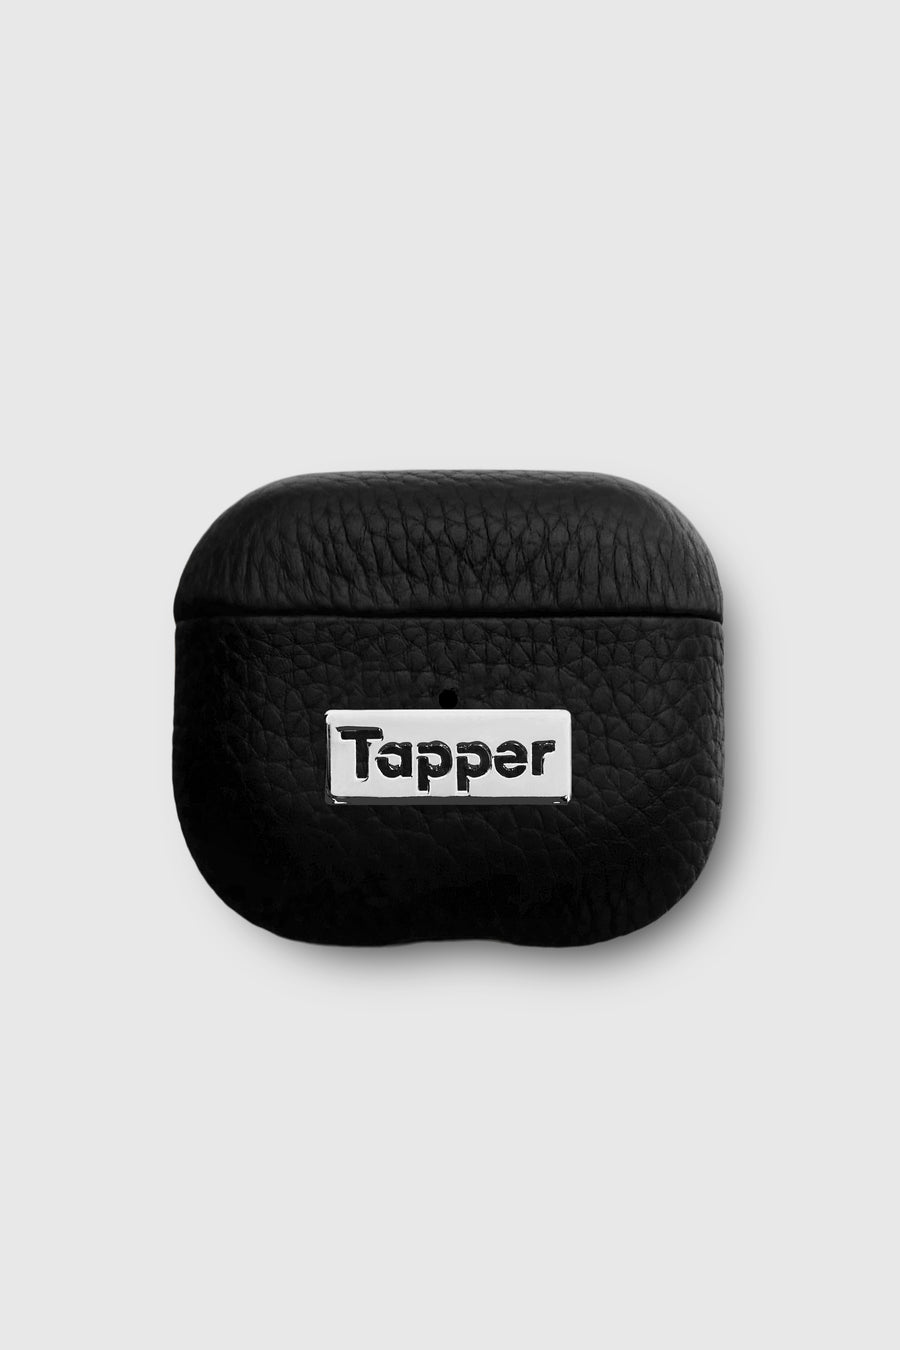 Tapper's luxurious black genuine lamb leather AirPods case protects and elevates the look of your AirPods. The luxurious, protective case for AirPods with a metal logo plate colored in silver steps up your AirPods game. The next must-have high end protective Apple AirPods accessory in real leather with metal details. Compatible with AirPods (3rd generation). Designed in Sweden by Tapper. Free Express Shipping at gettapper.com